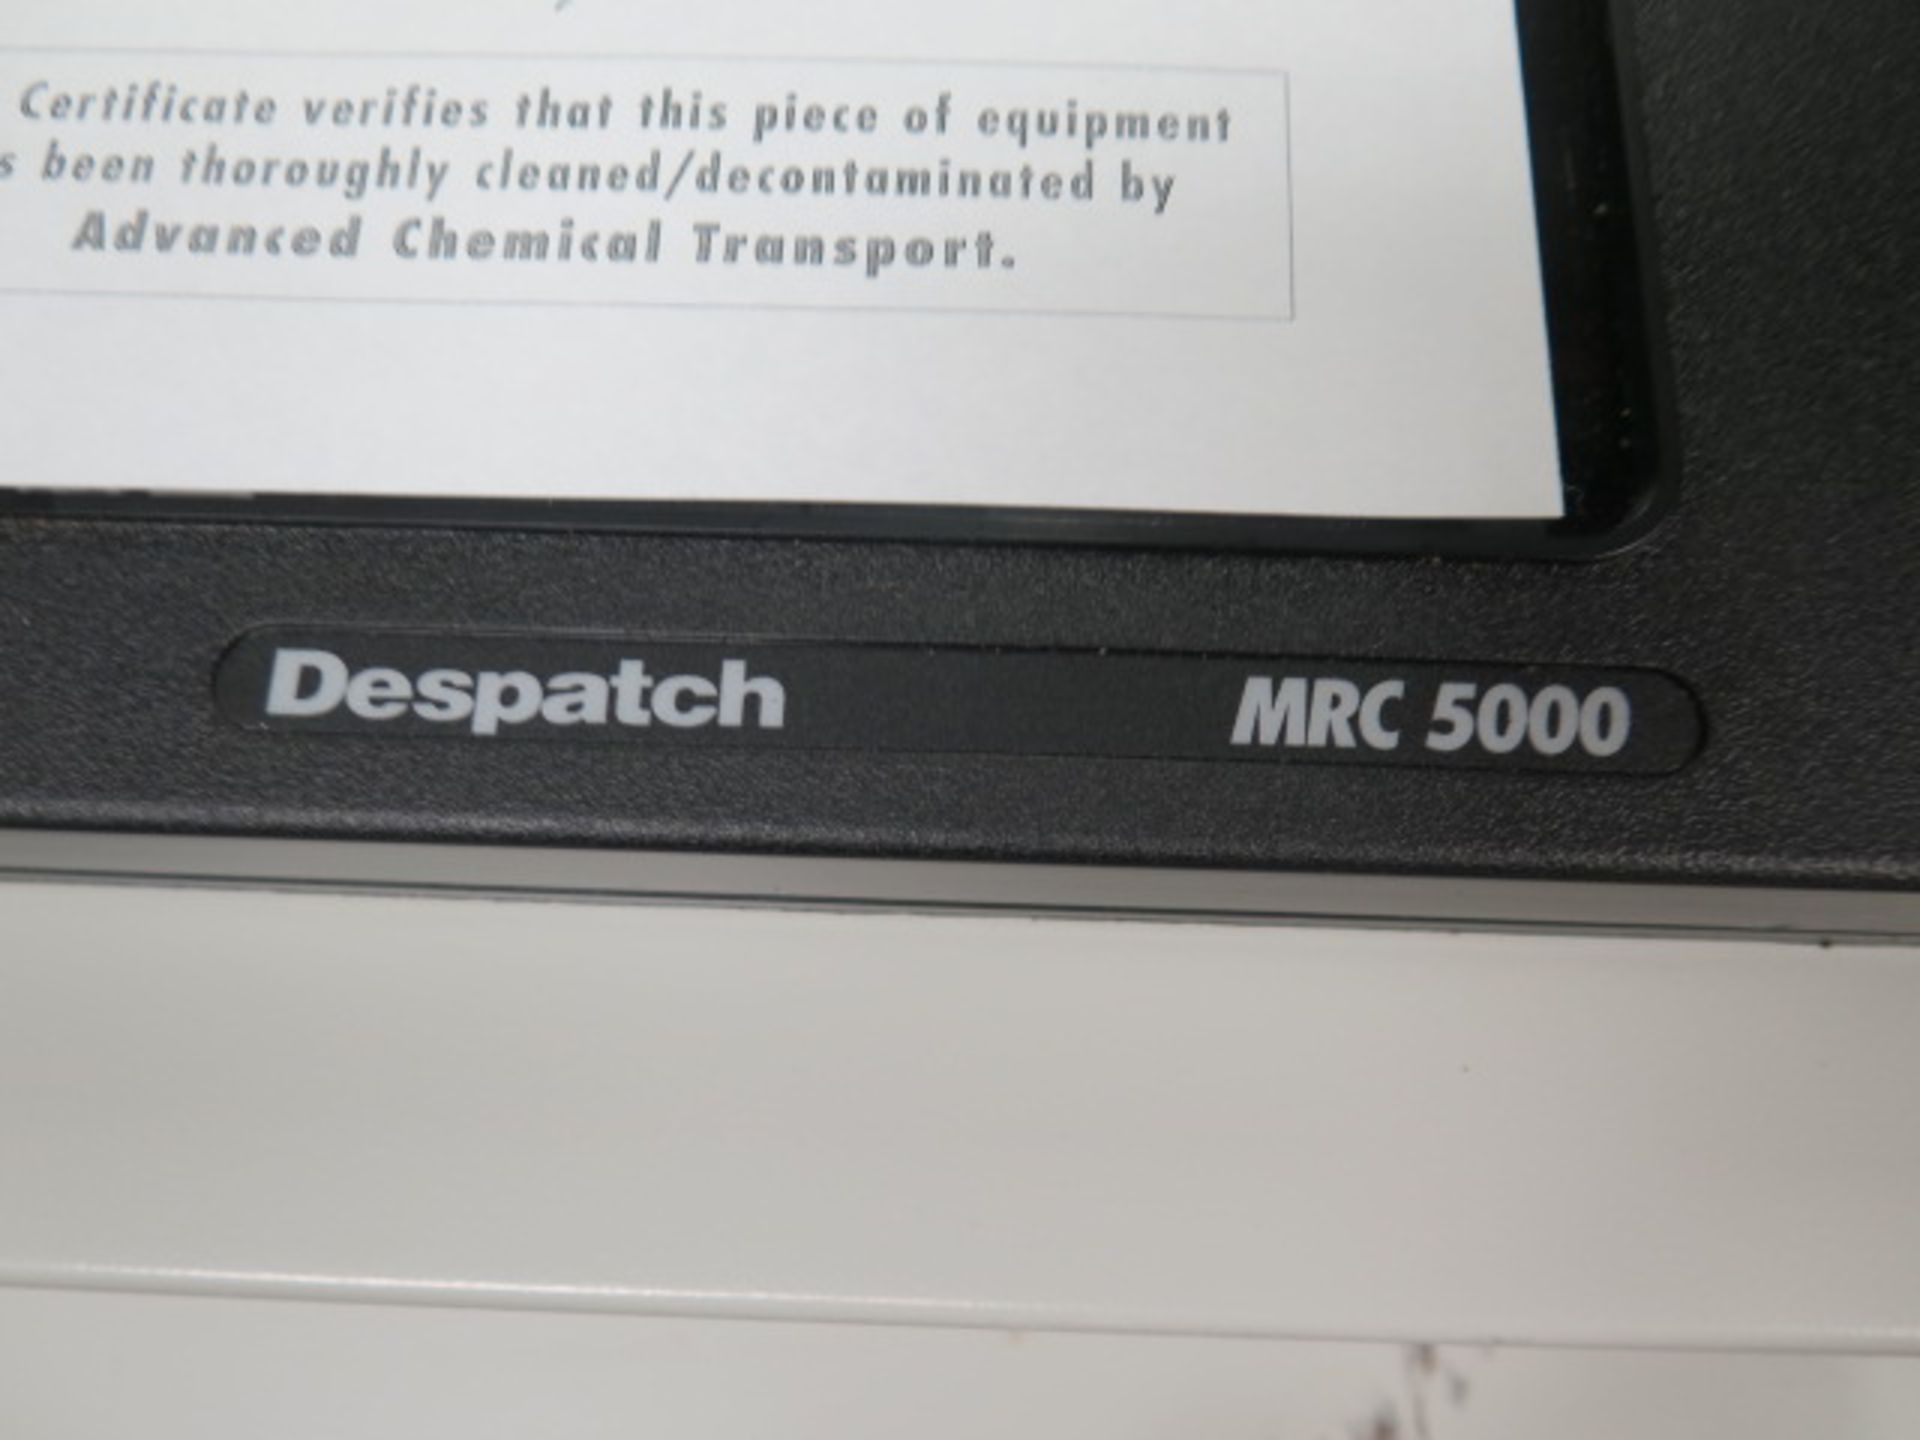 Despatch LAC1-38A-5 Oven s/n 168354 w/ MRC 5000 Recorder, heats to 260 C / 500 Degrees F, SOLD AS IS - Image 7 of 10